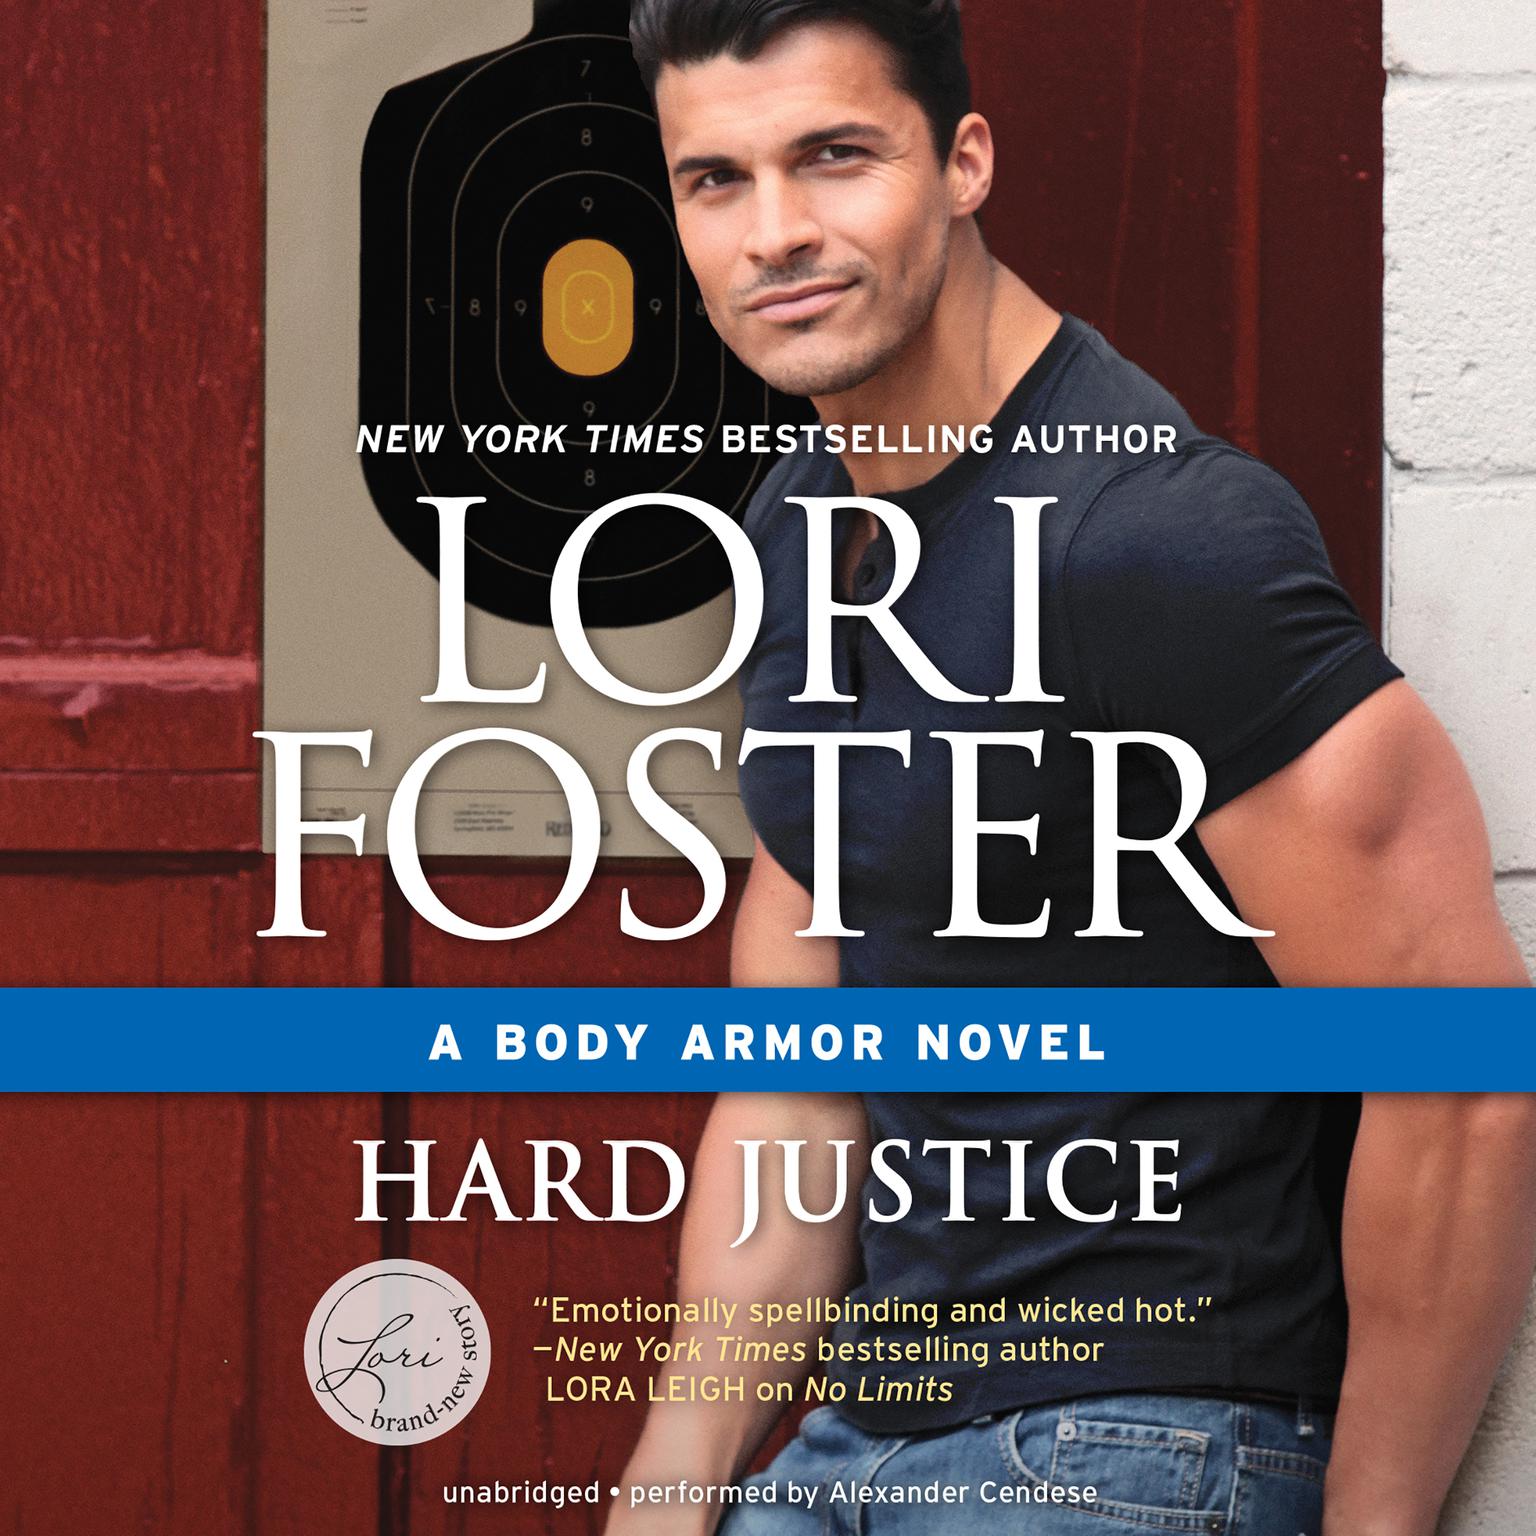 Hard Justice Audiobook, by Lori Foster